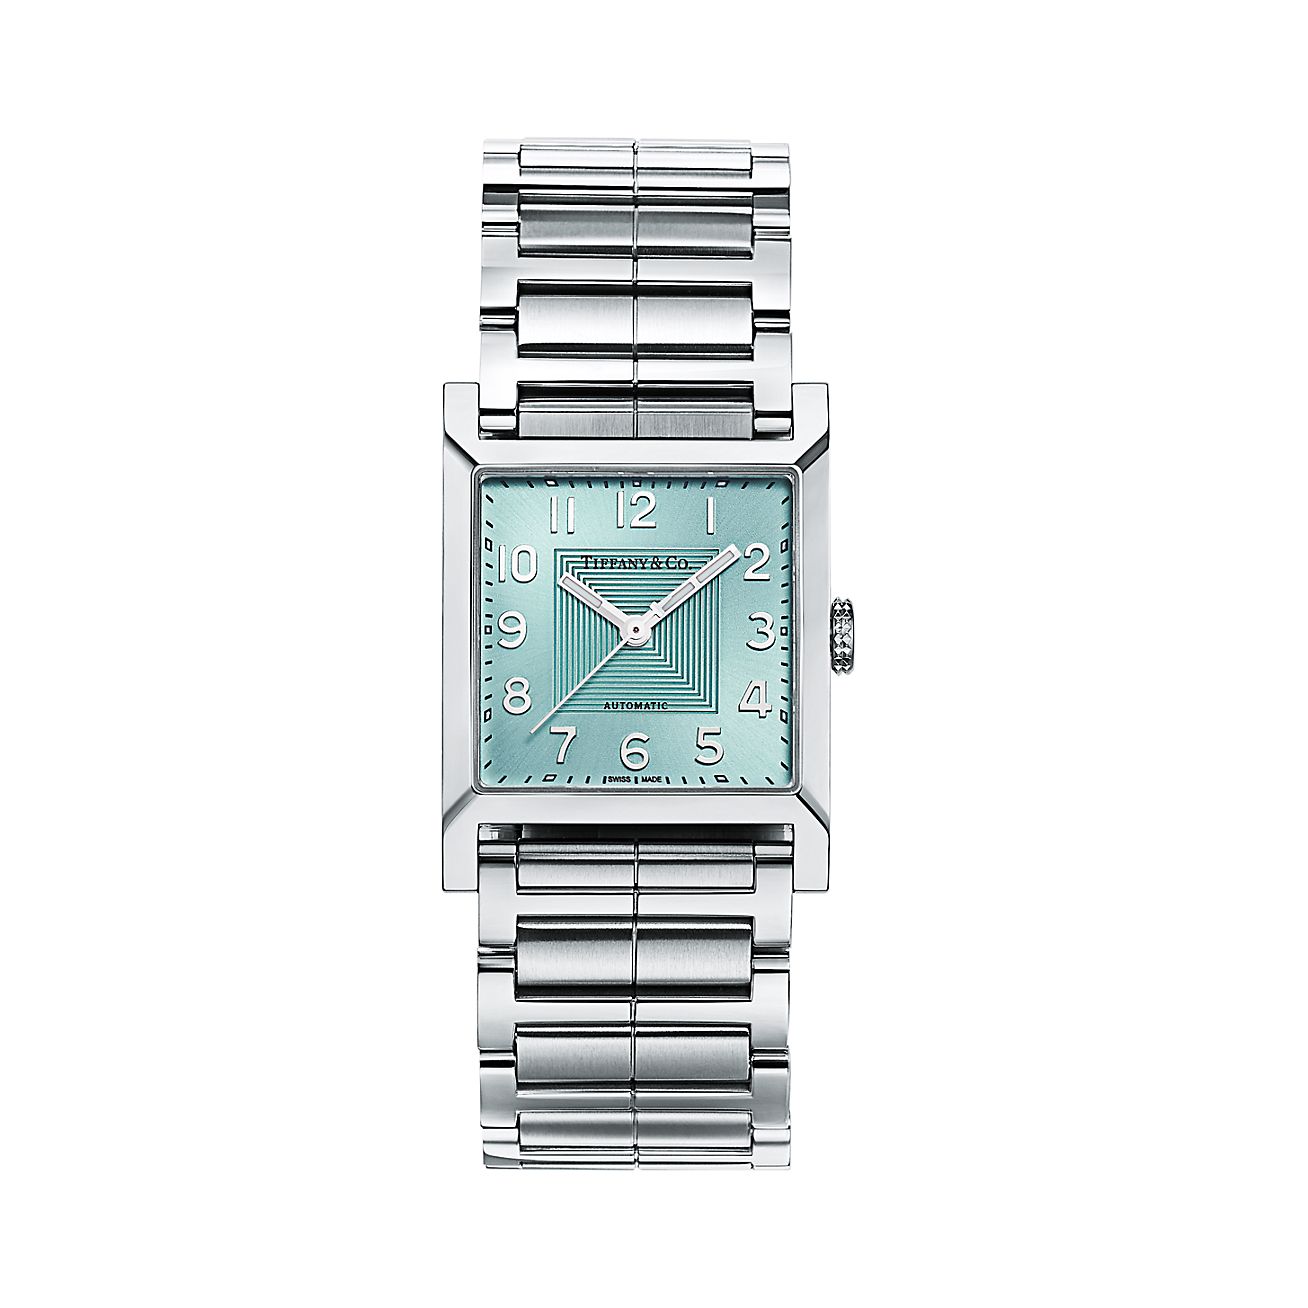 Tiffany 1837 Makers 27 mm square watch in stainless steel with 